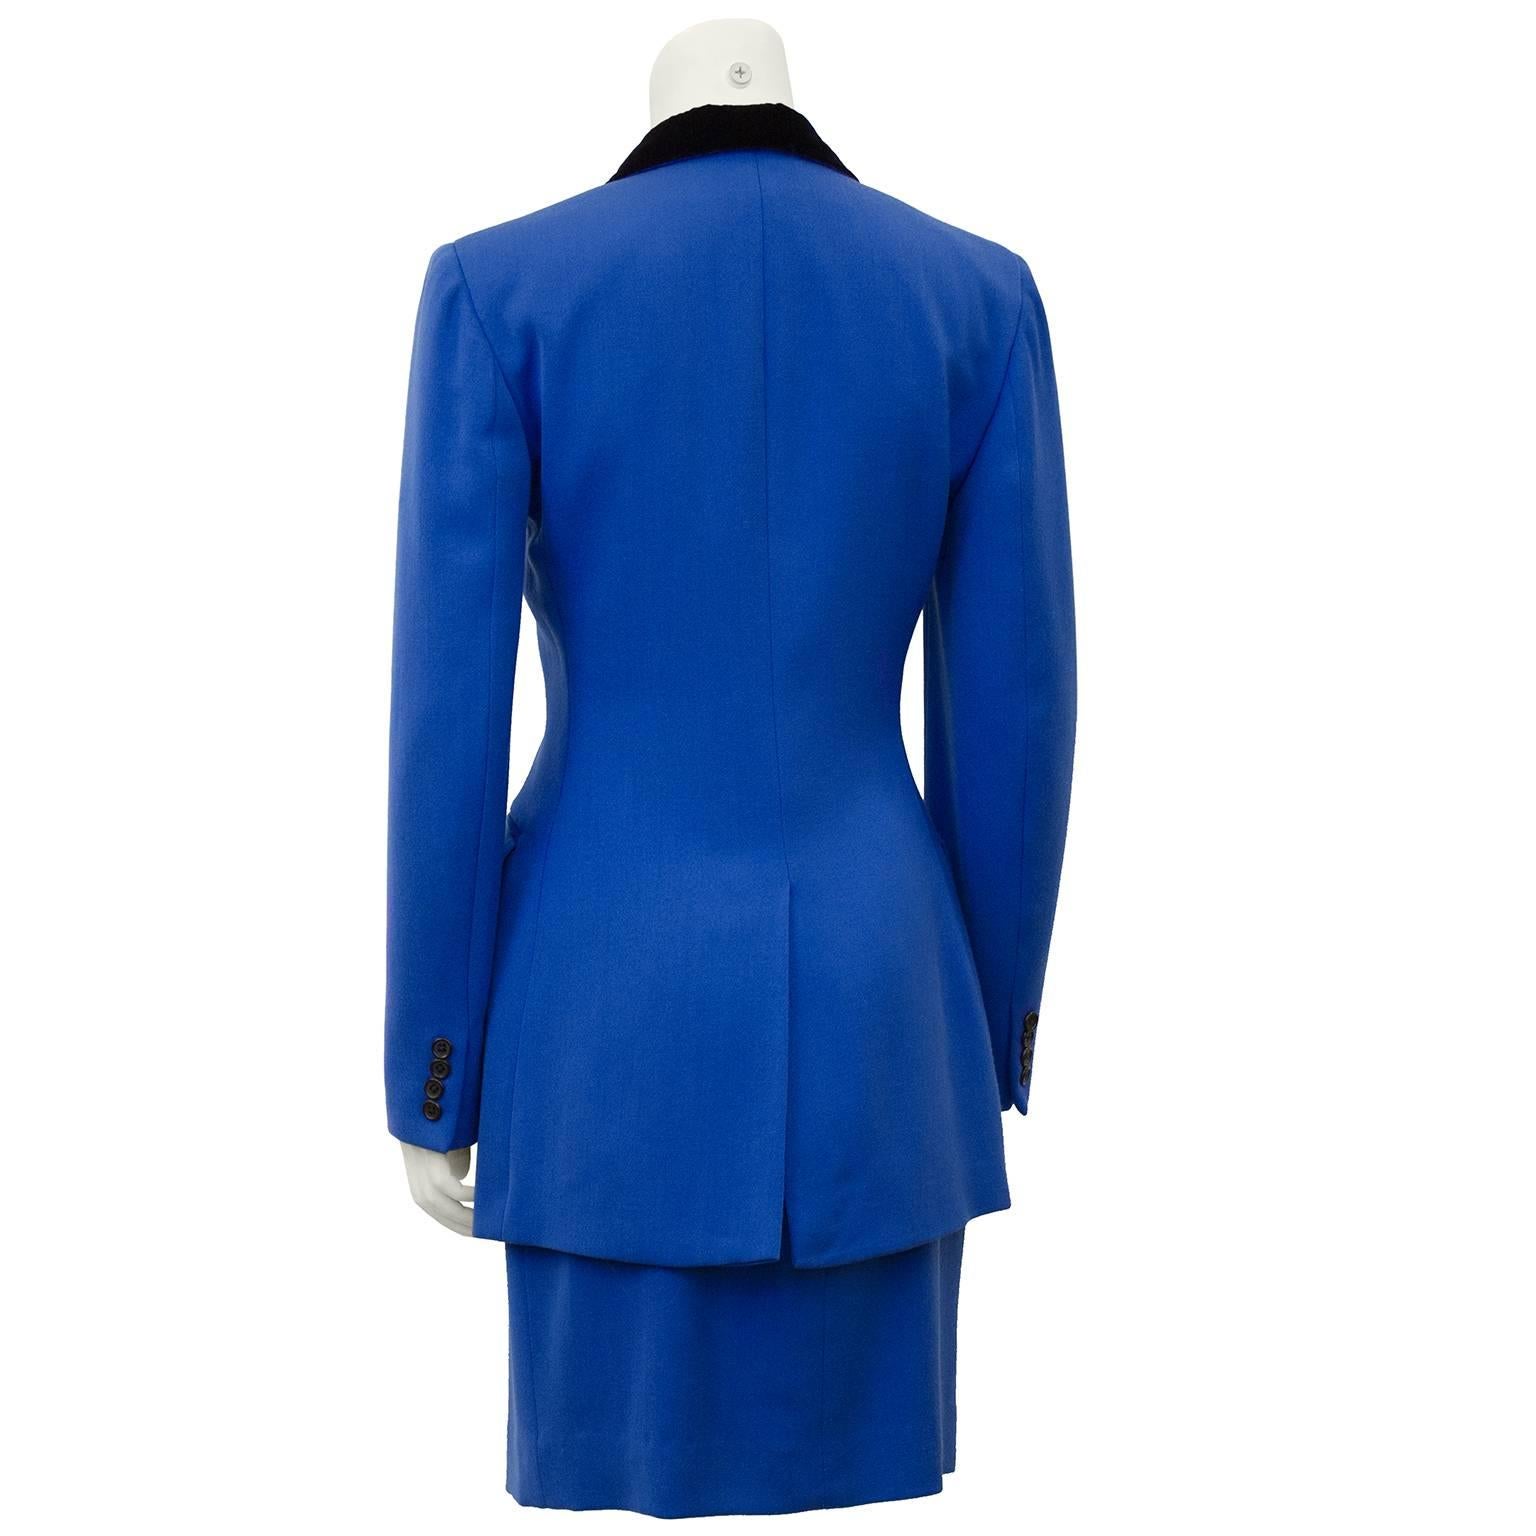 1980's Ralph Lauren equestrian inspired royal blue wool skirt suit. Double breasted, long,  fitted through the waist jacket with notched collar and jet black velvet upper collar. High waisted matching blue wool pencil skirt. Very Working Girl.